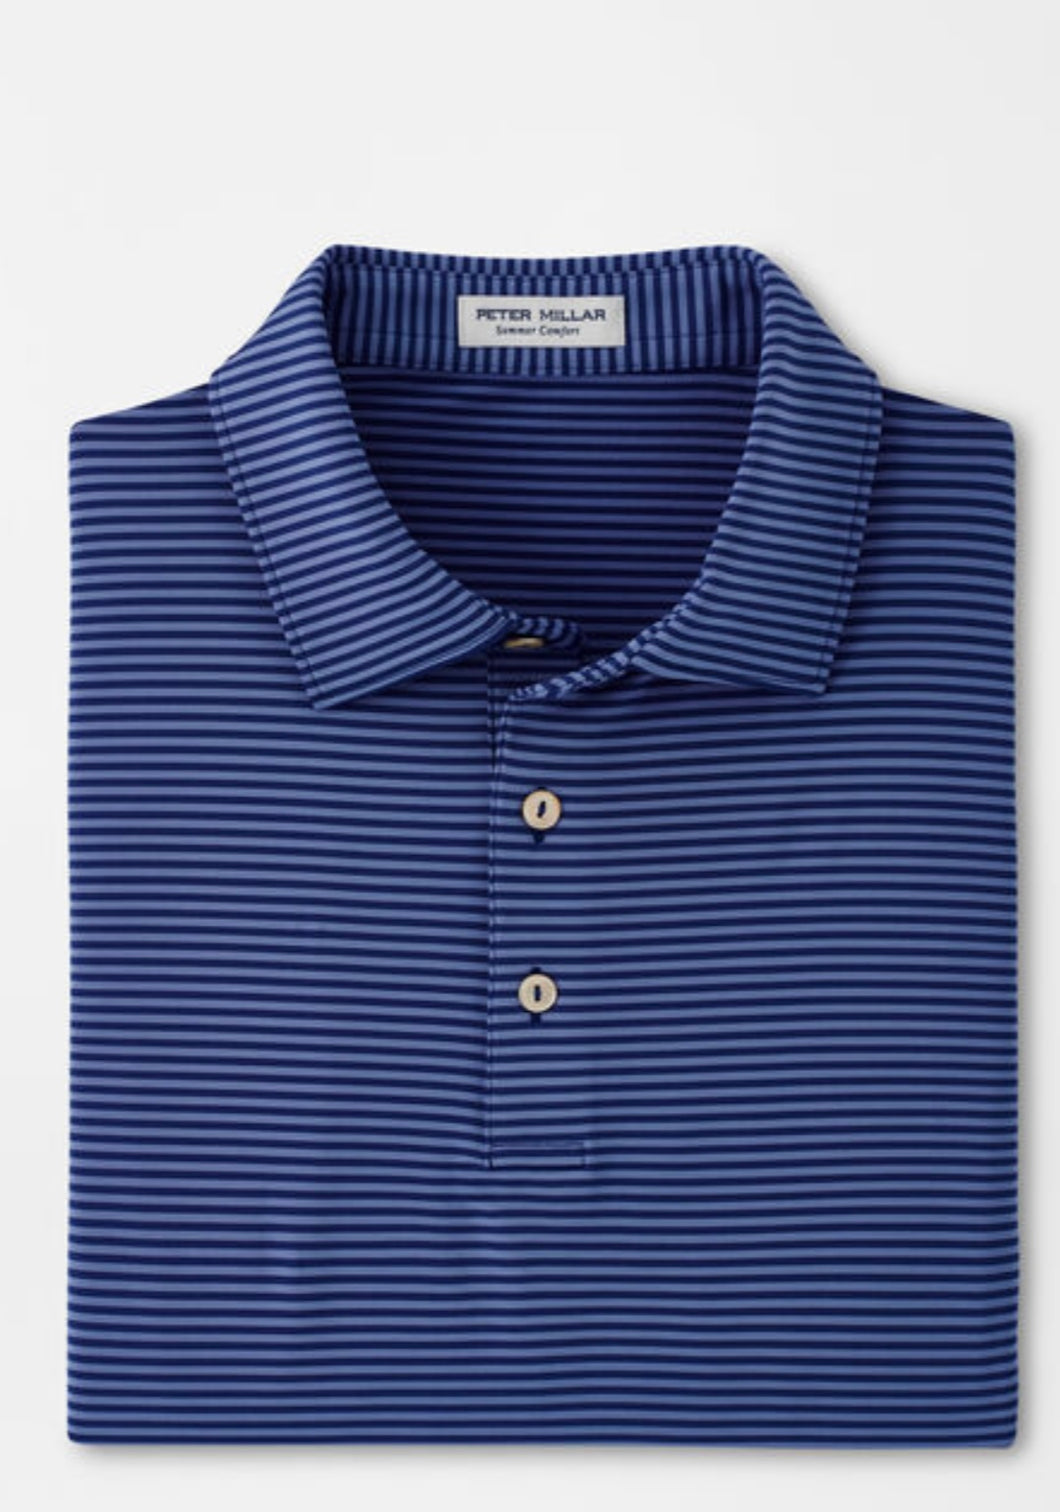 Peter Millar Hales Perf Jersey Polo